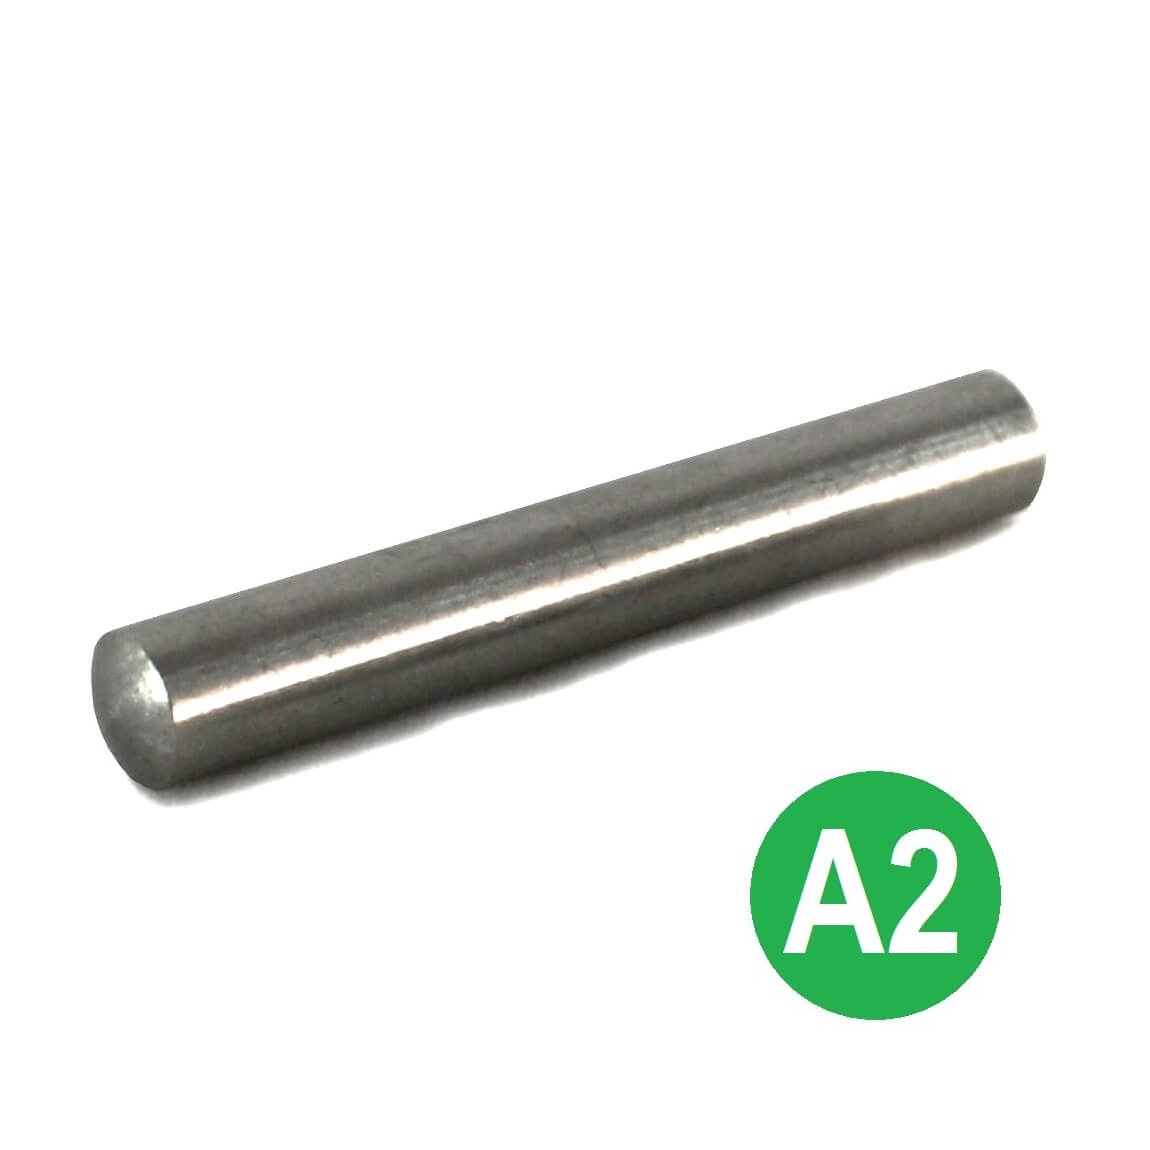 4mm Dia x 16mm A2 Stainless Dowel Pins DIN 7